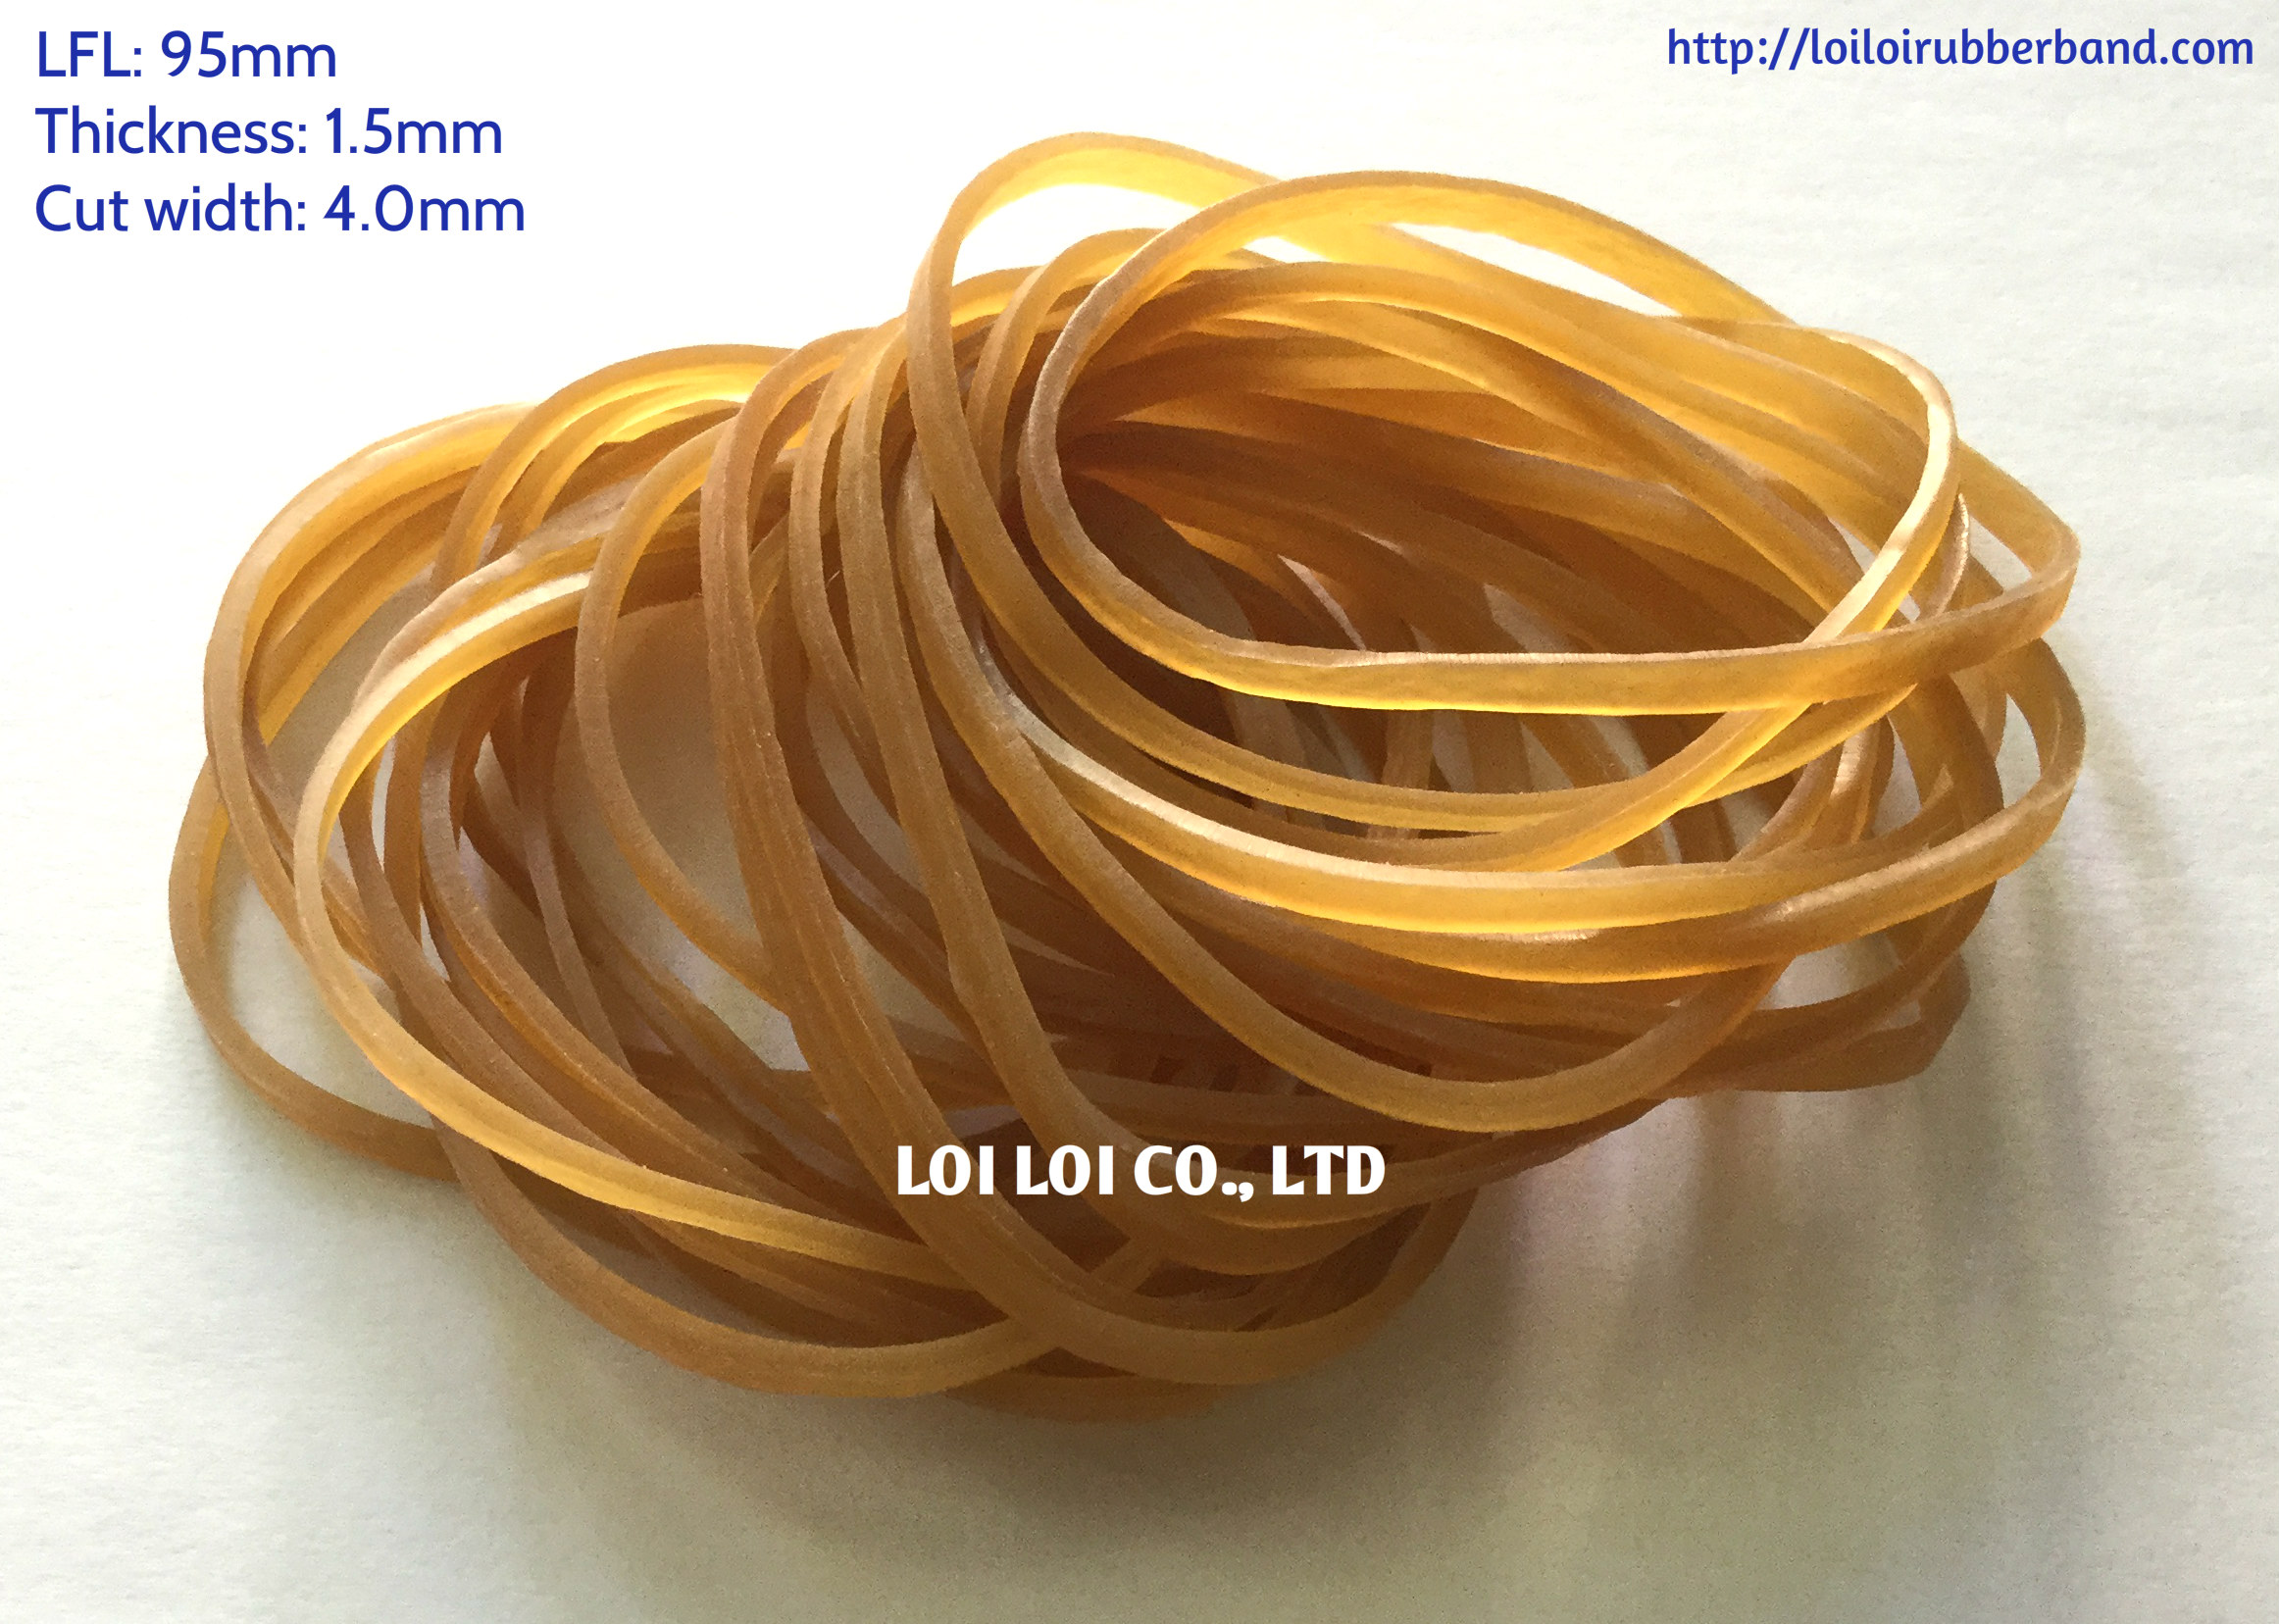 High quality natural rubber band, strong and elasticity